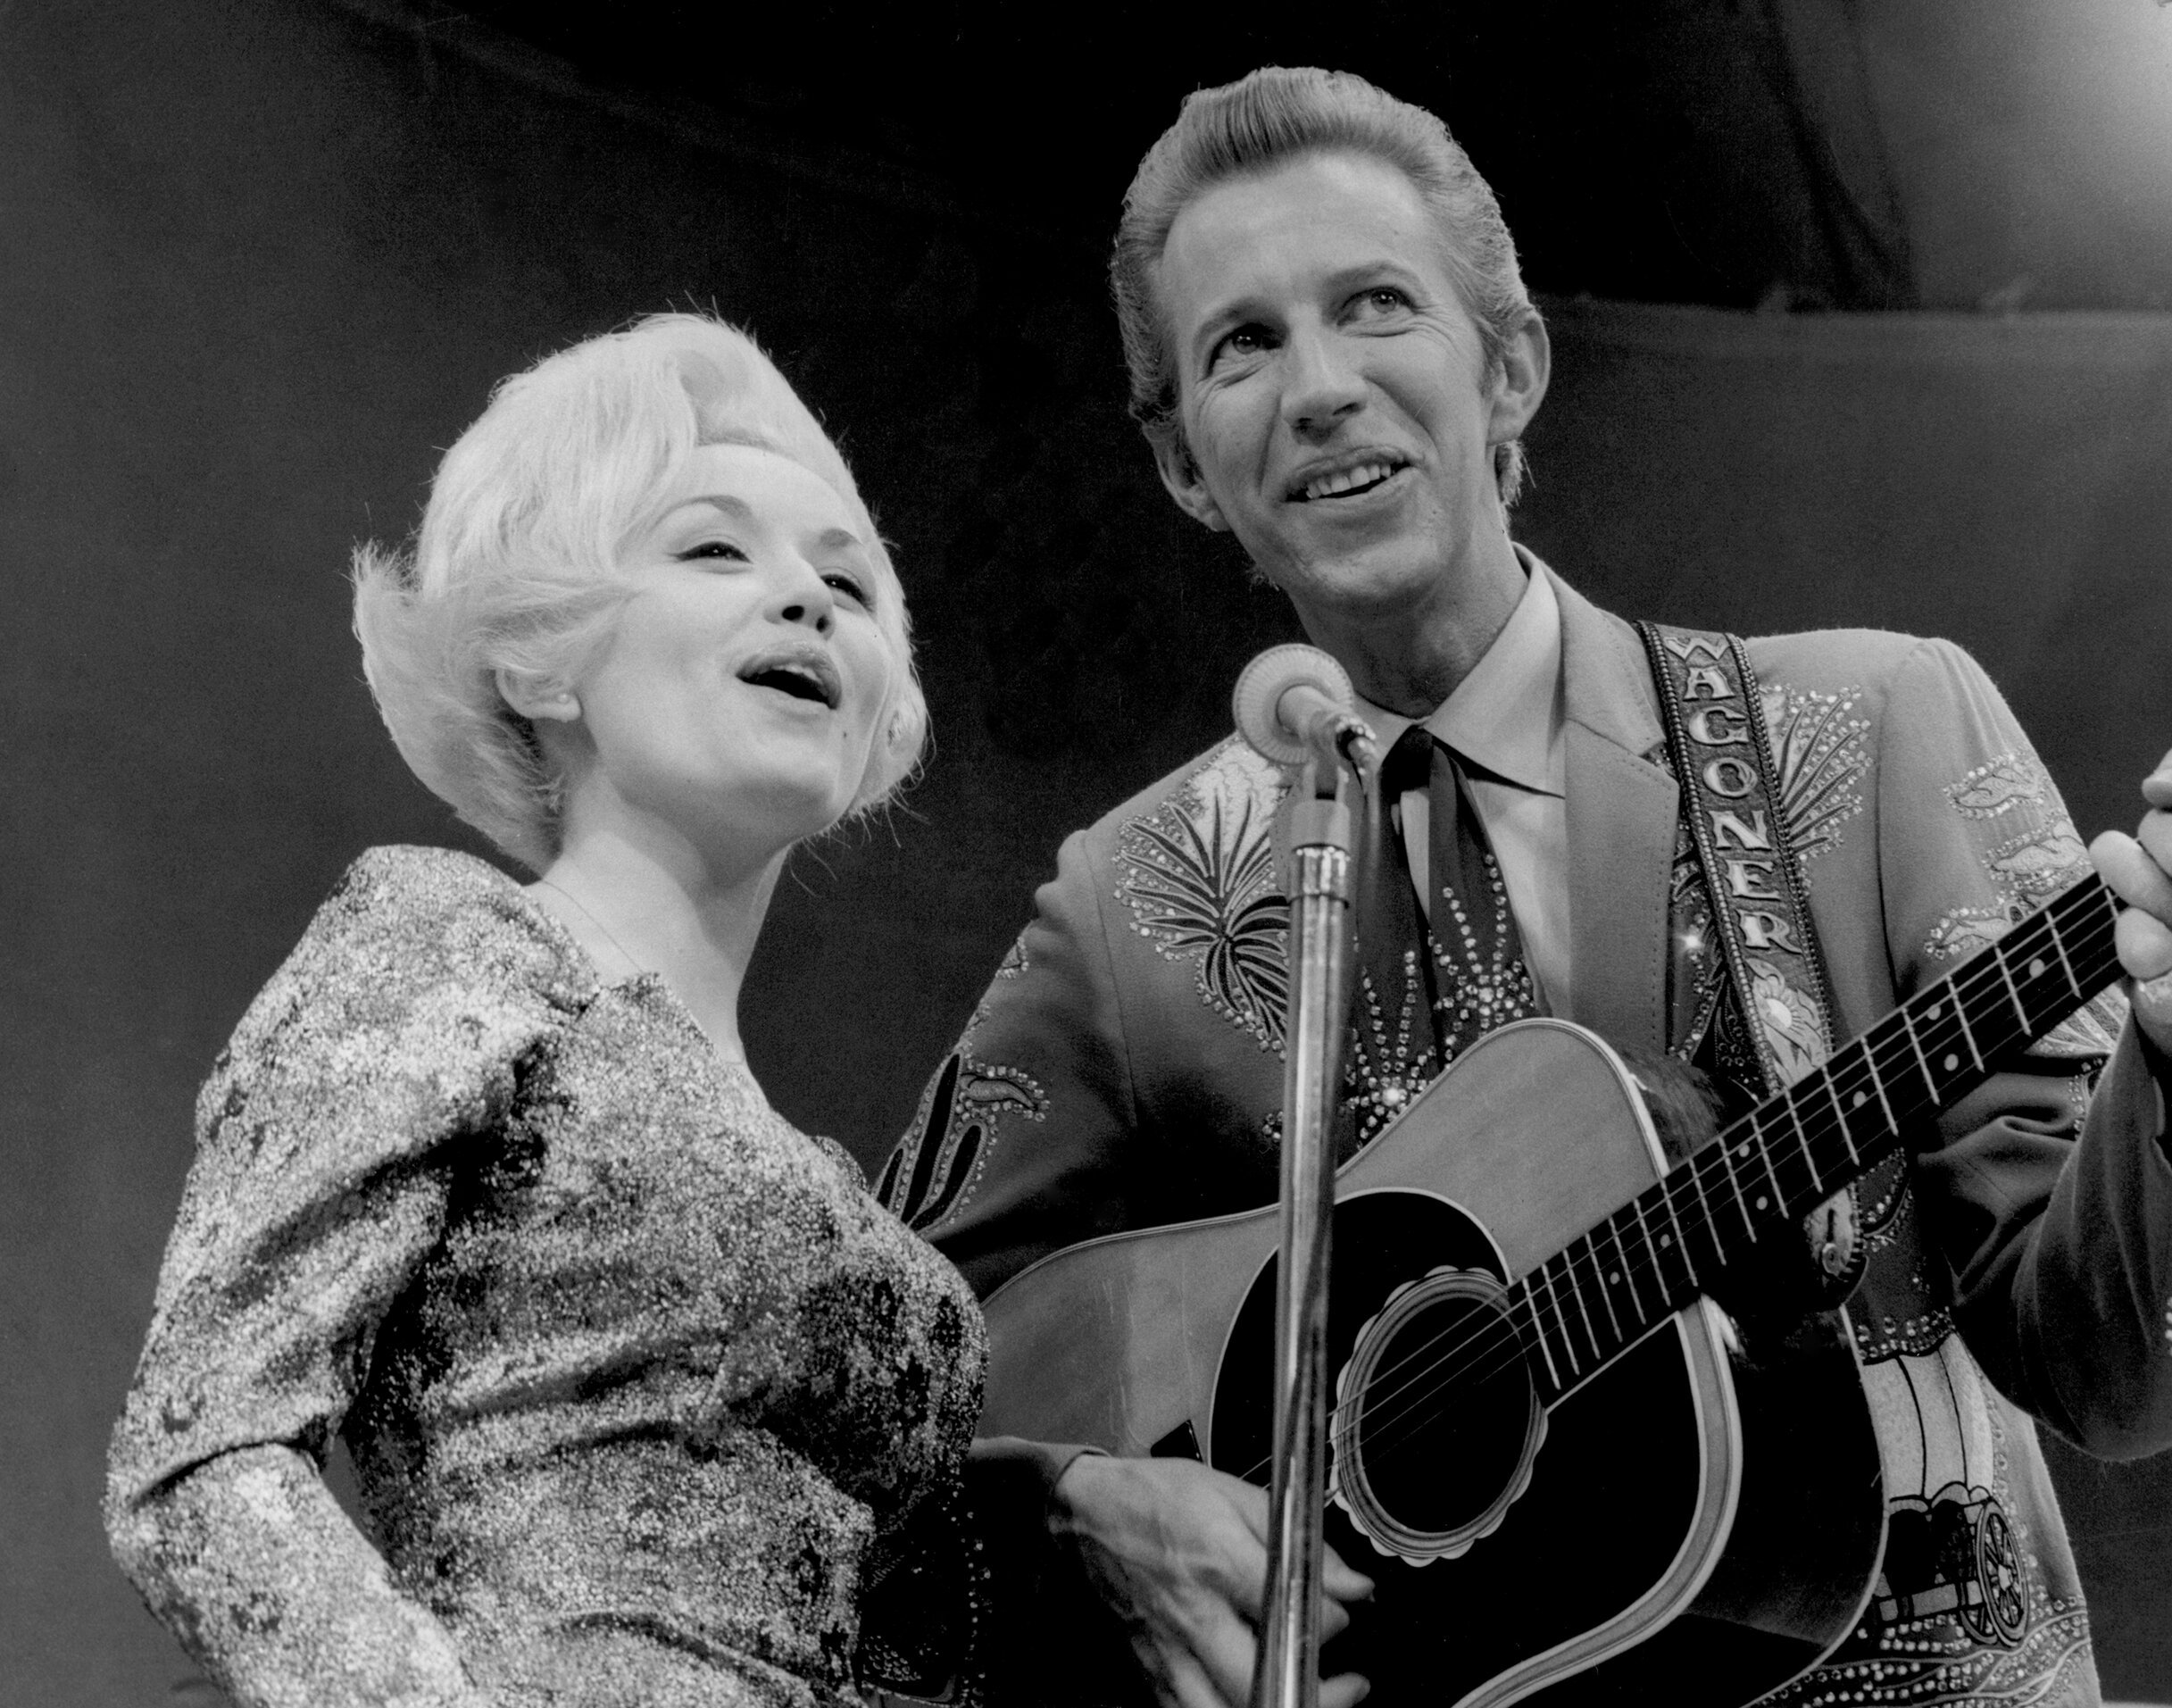 A black and white shot of Dolly Parton and Porter Wagner singing on stage.